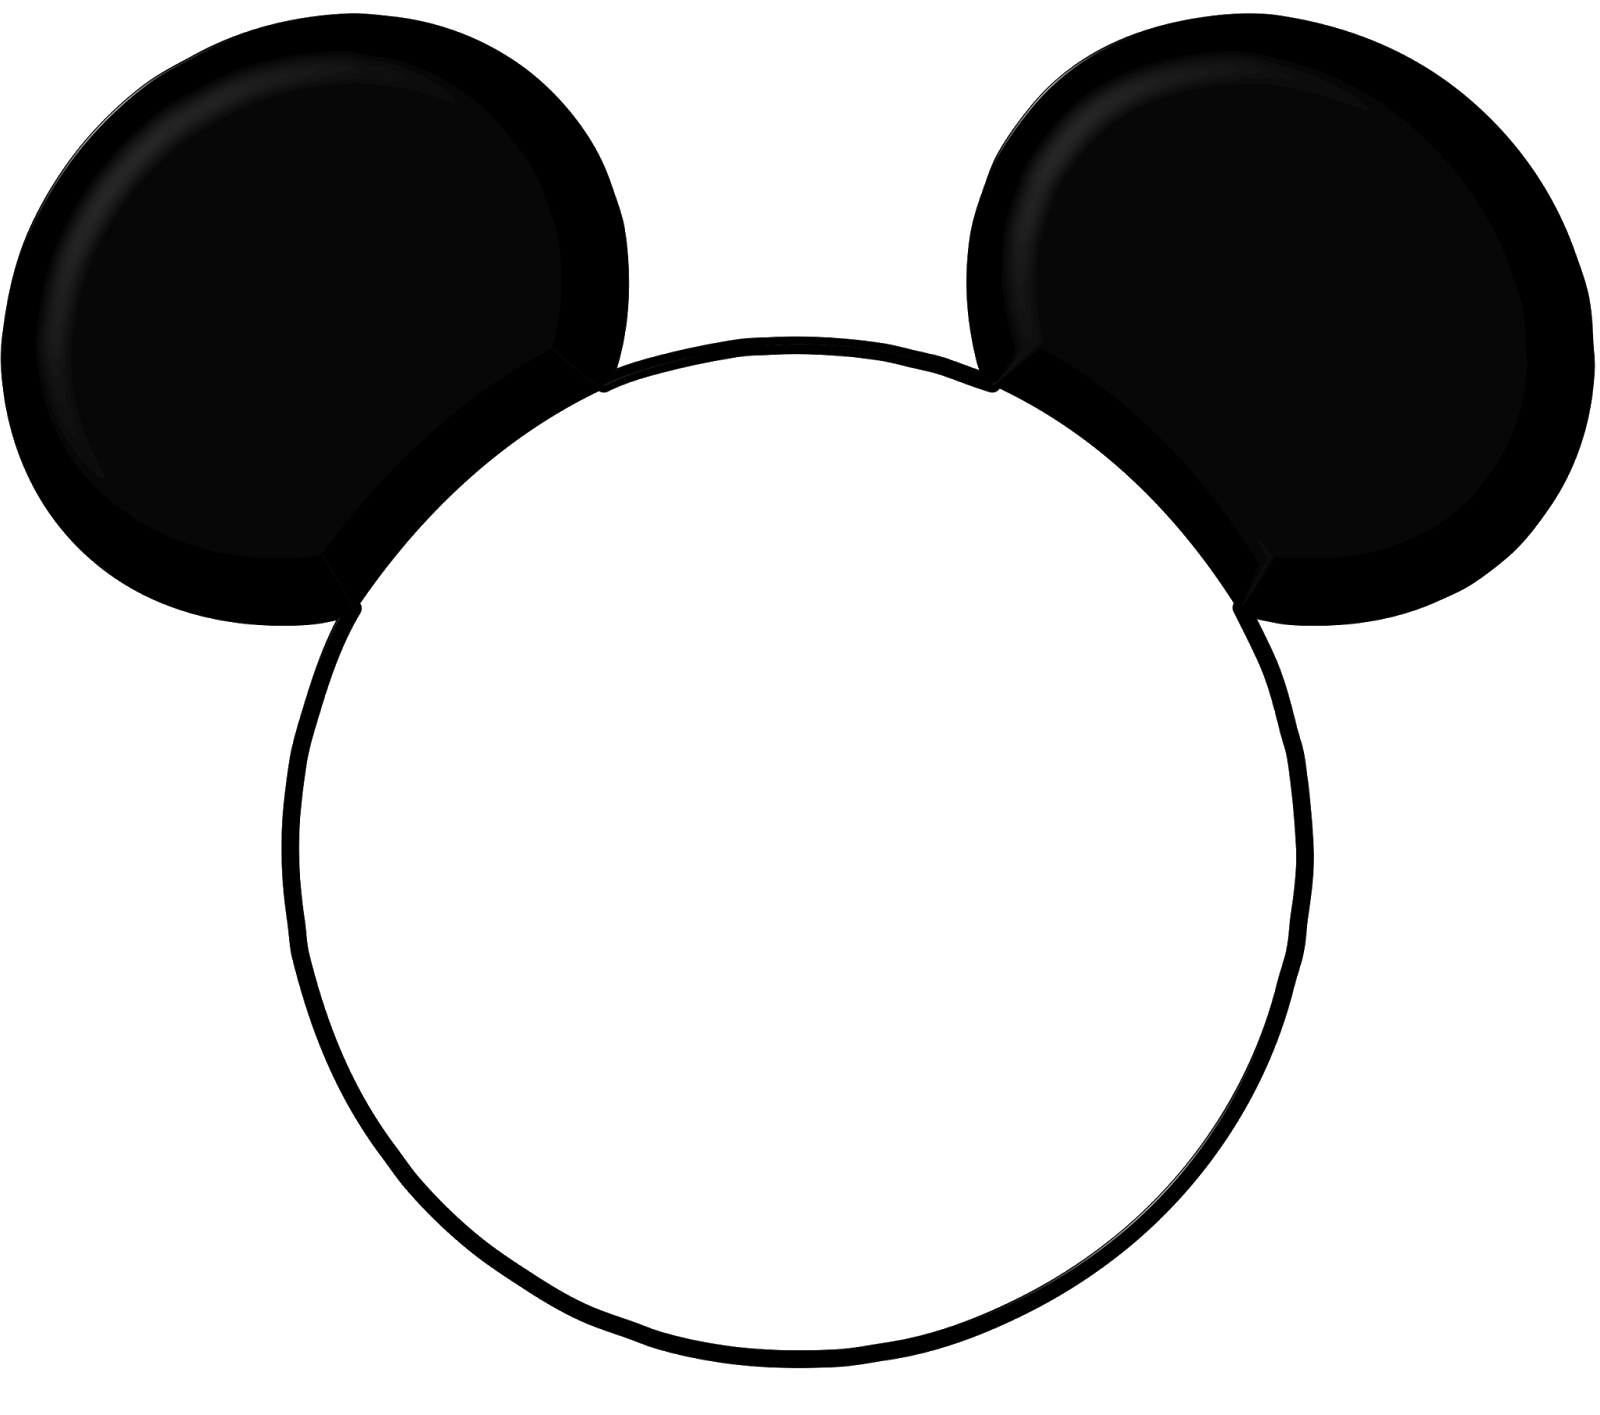 Printable Mickey Mouse Head - Cliparts.co